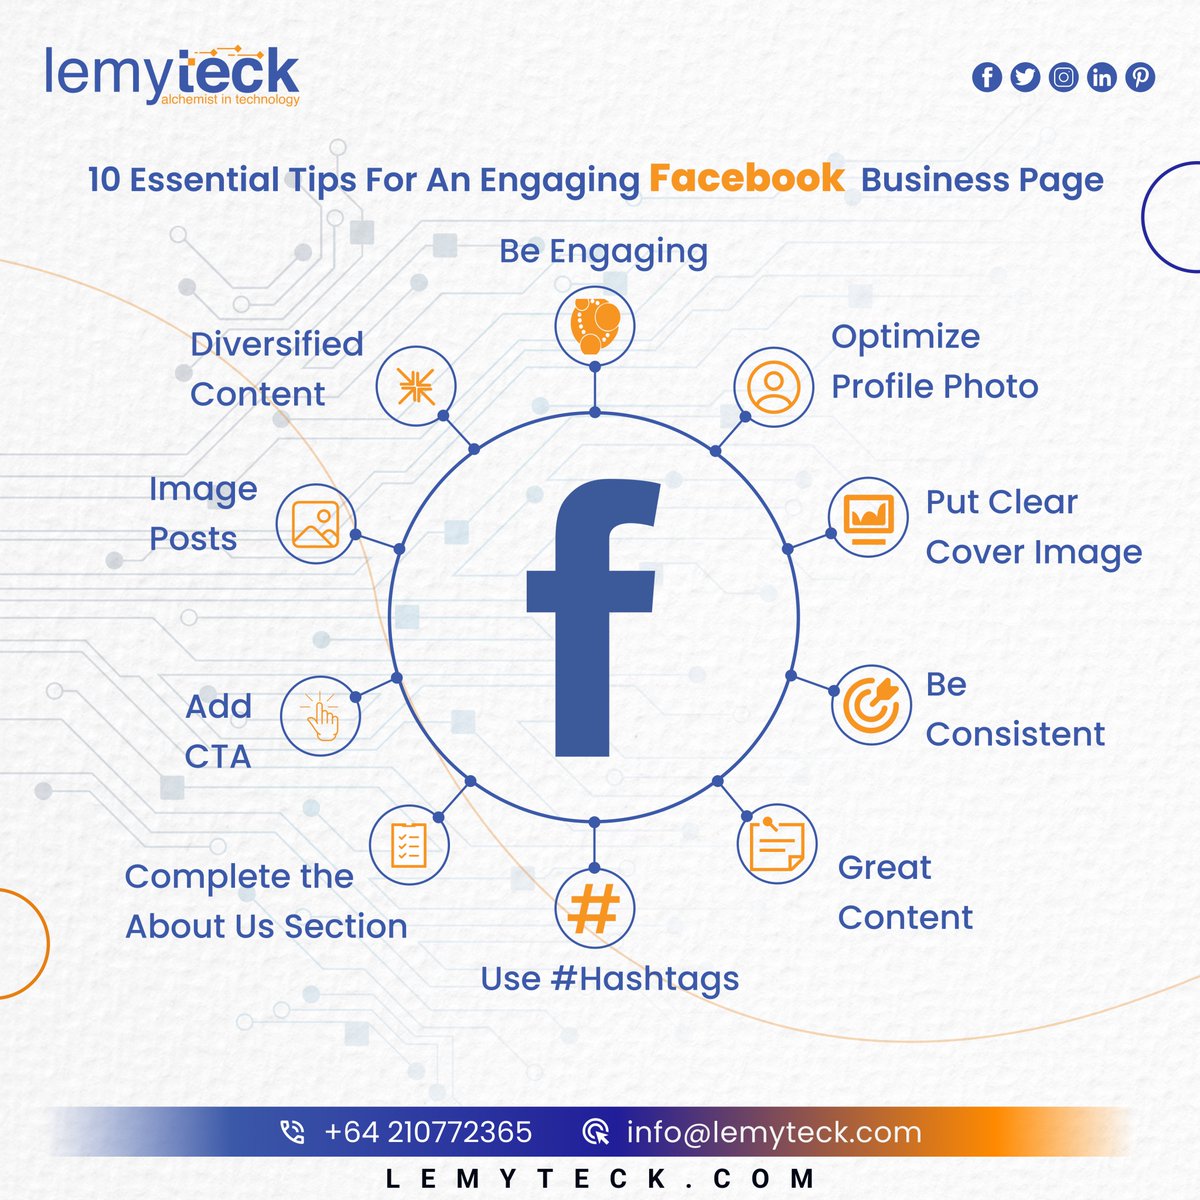 Facebook Business Tips: 1. 🔍 Optimize Profile & 🖼️ Cover Image 2. 💬 Engage & 🔄 Be Consistent 3. 🌟 Share Great, 🎨 Diversified Content 4. 📸 Use Images, #️⃣ Hashtags 5. ➡️ Add CTAs, 📝 Complete About Section. Boost your presence! #lemyteck #FacebookTips